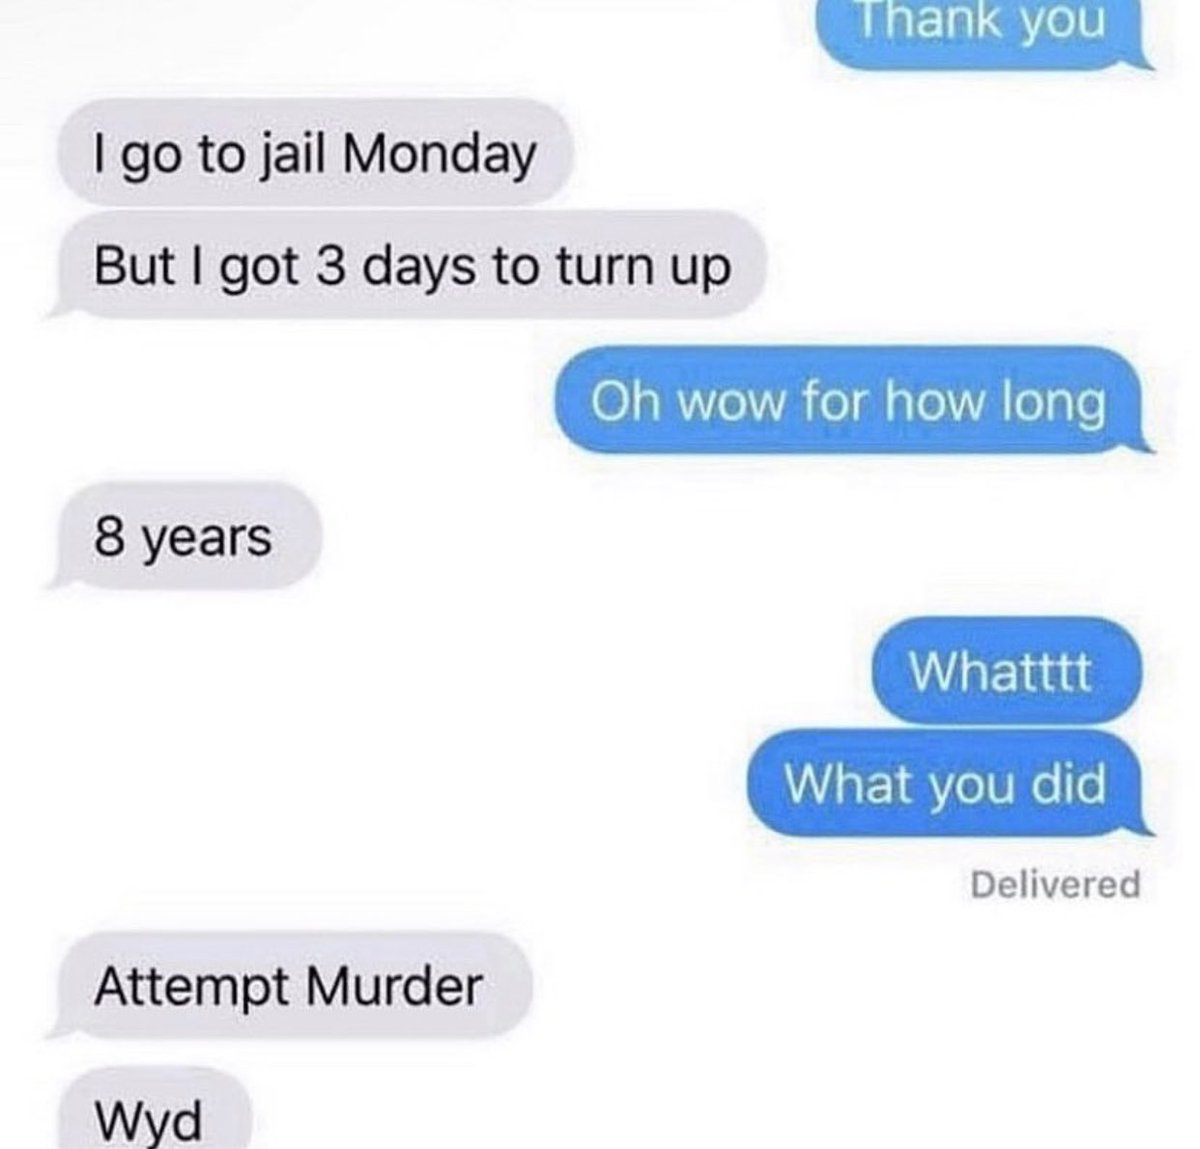 suspicious dms from twitter - material - I go to jail Monday But I got 3 days to turn up 8 years Attempt Murder Wyd Thank you Oh wow for how long Whatttt What you did Delivered